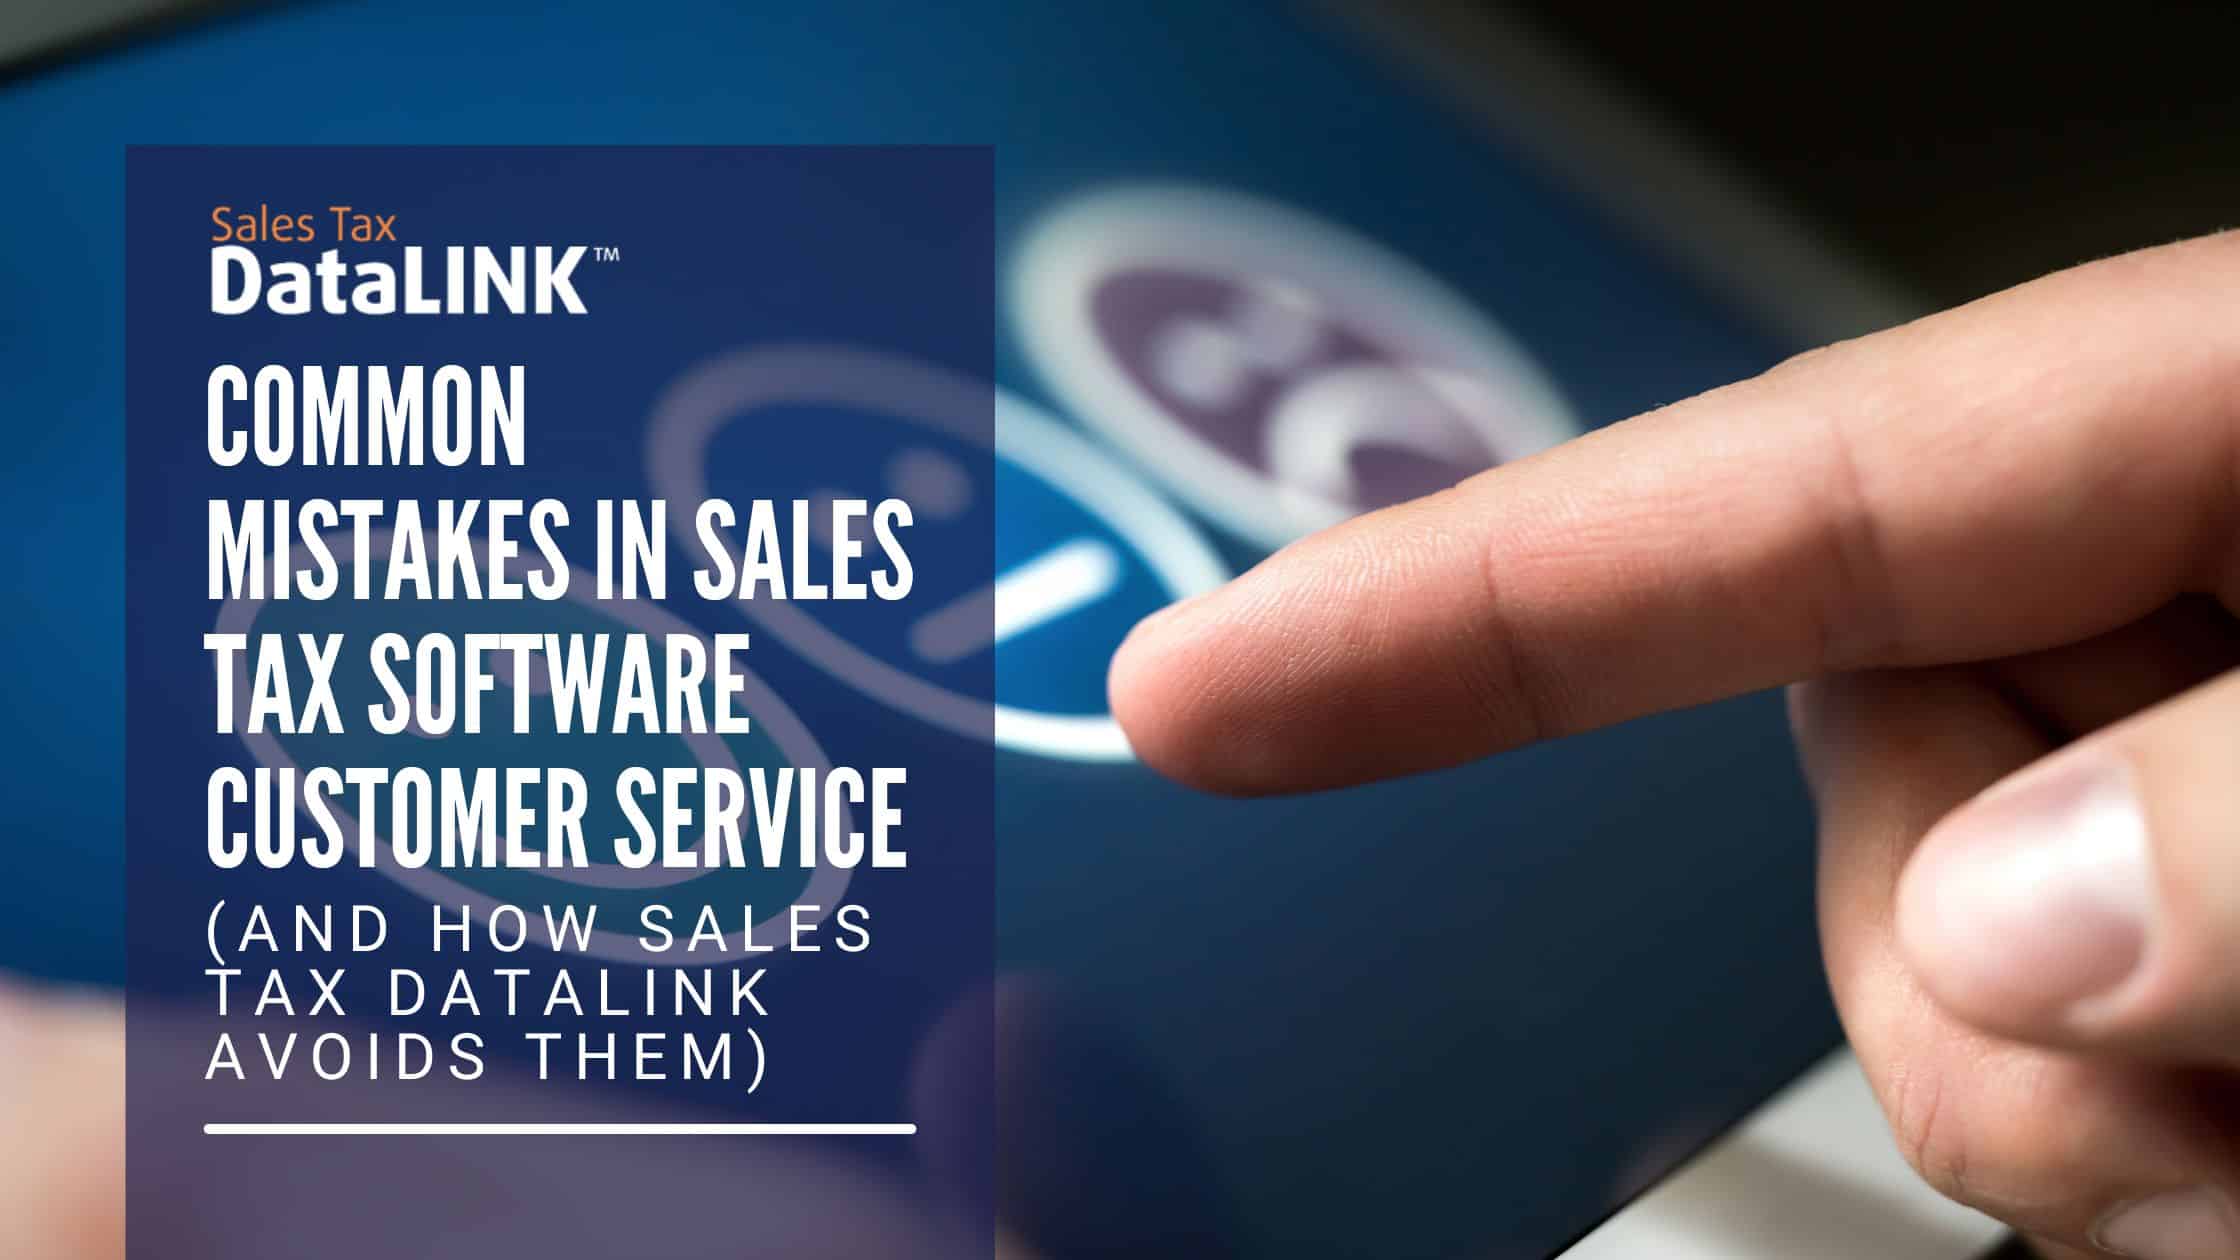 Common Mistakes in Sales Tax Software Customer Service (And How Sales Tax DataLINK Avoids Them)